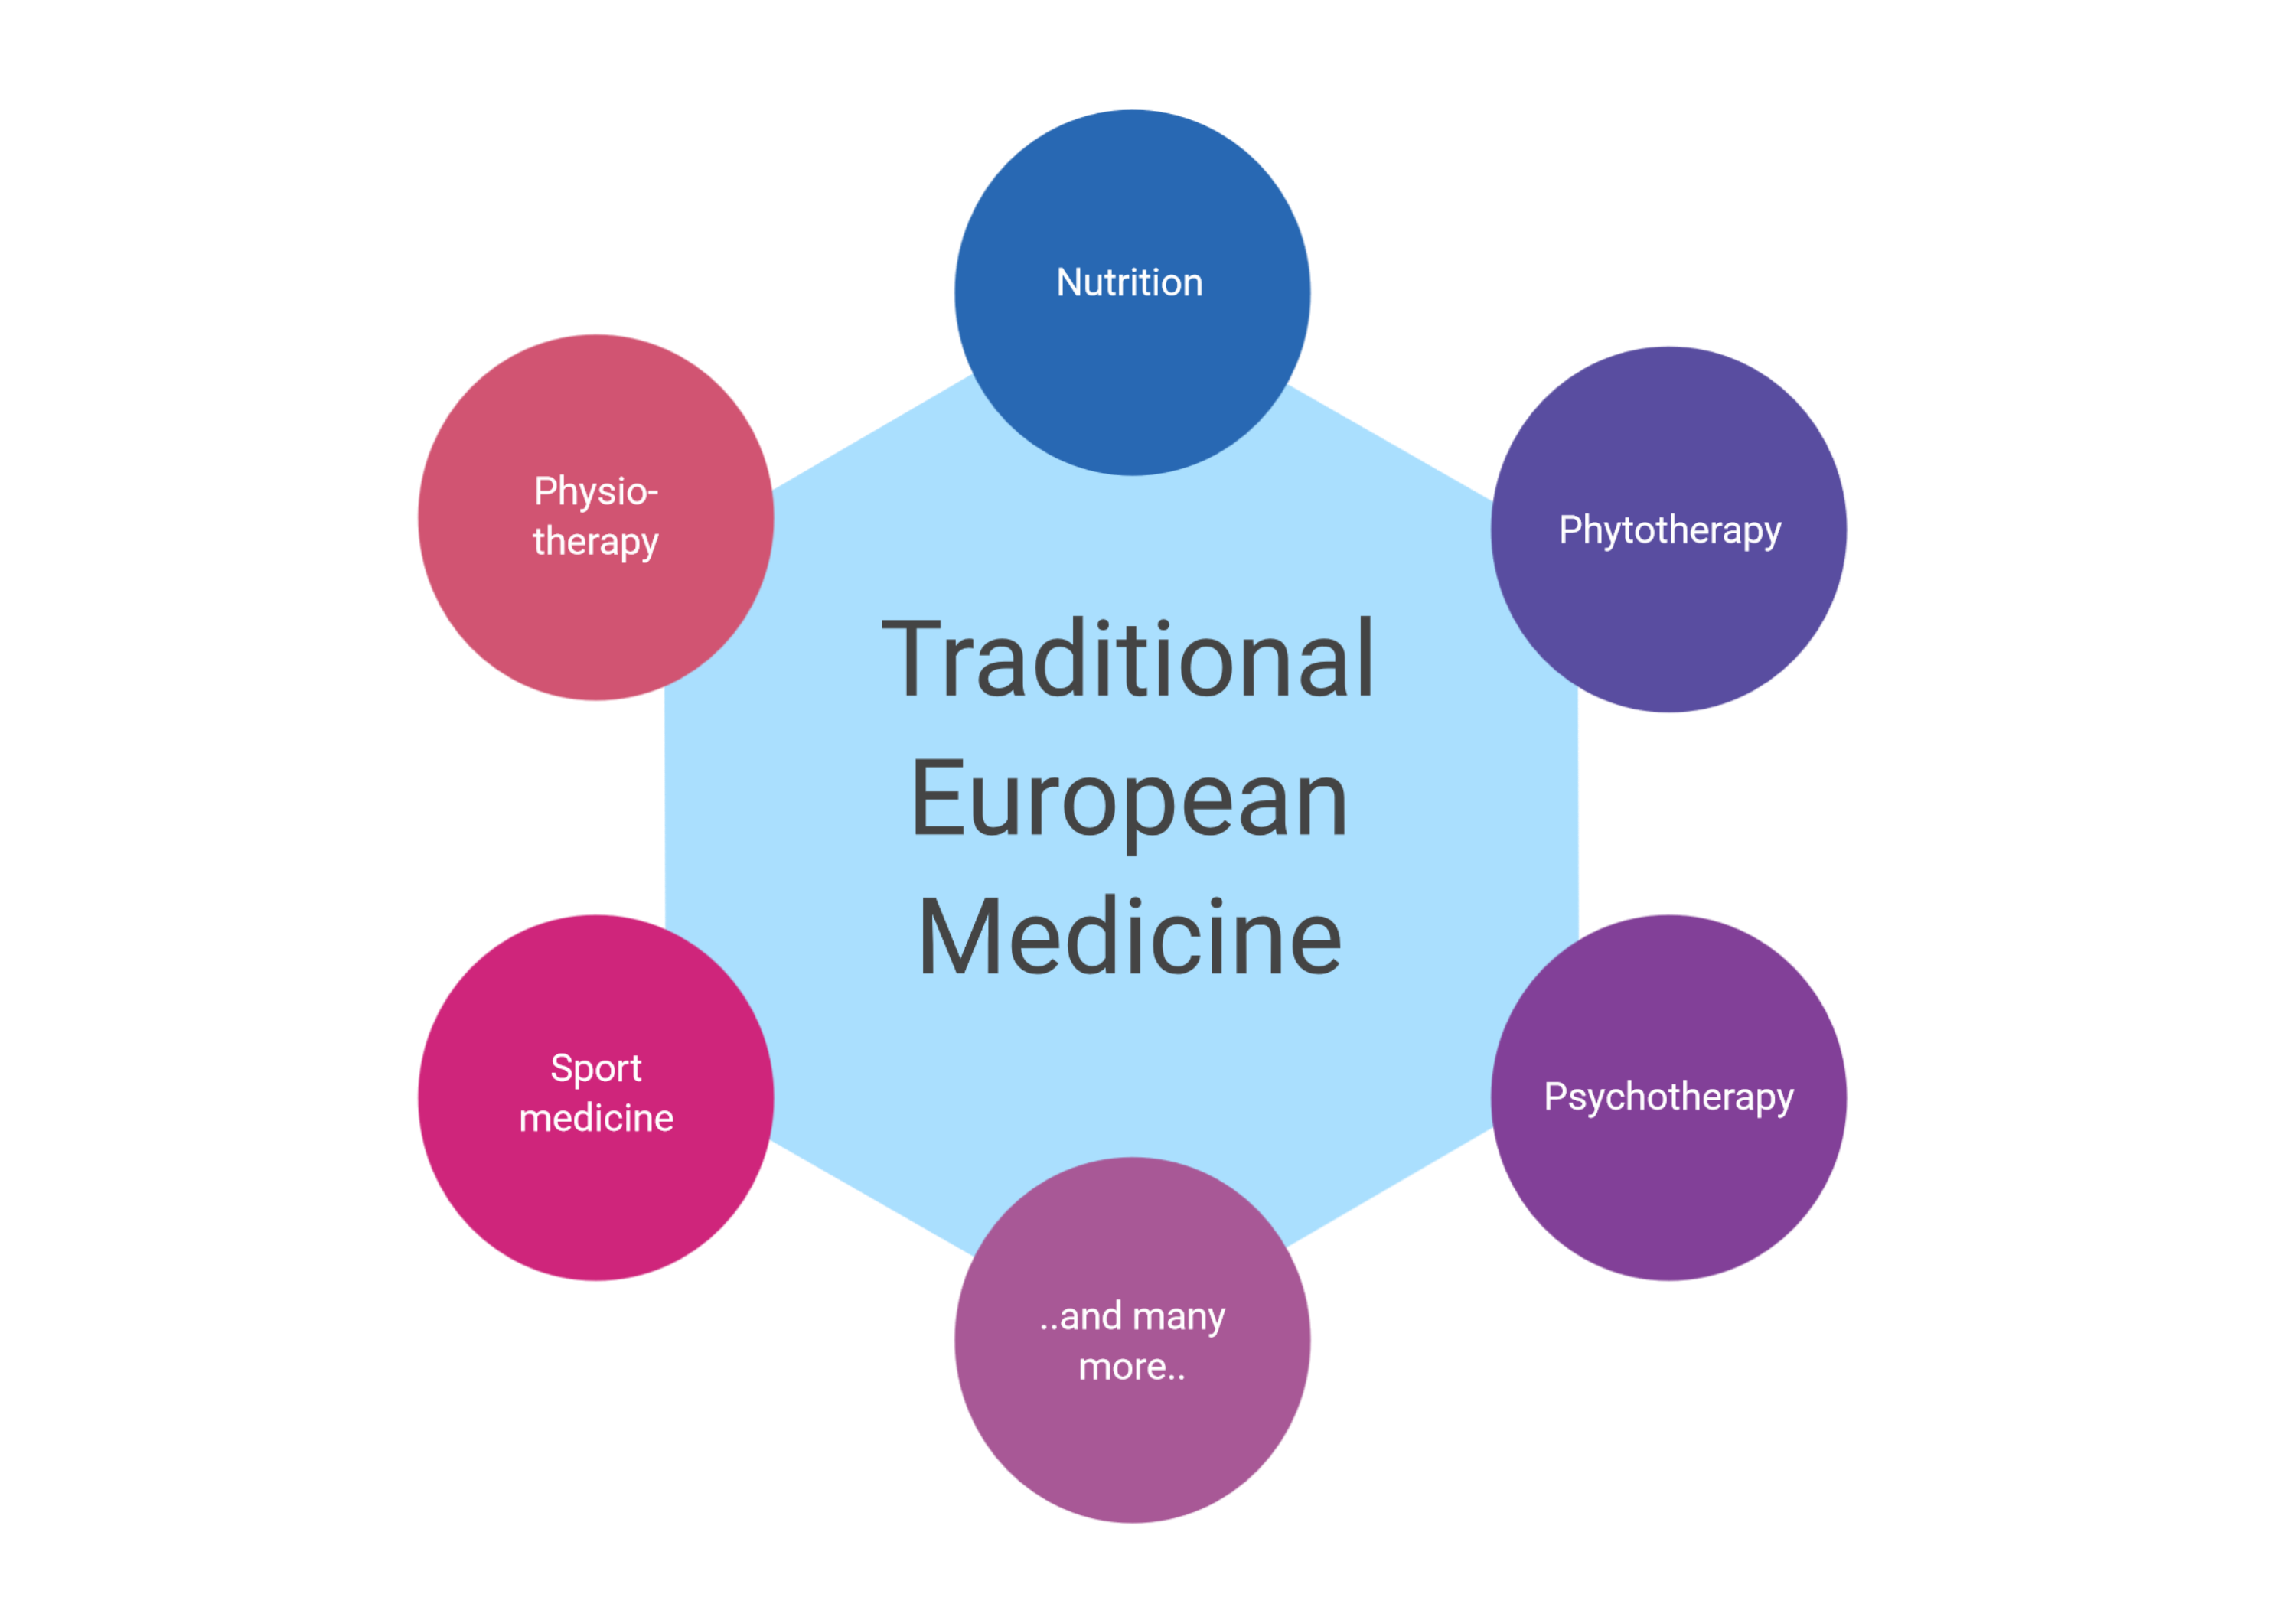 In Europe we are lucky to have Traditional European Medicine, which primarily deals with local plants and their medicinal benefits.